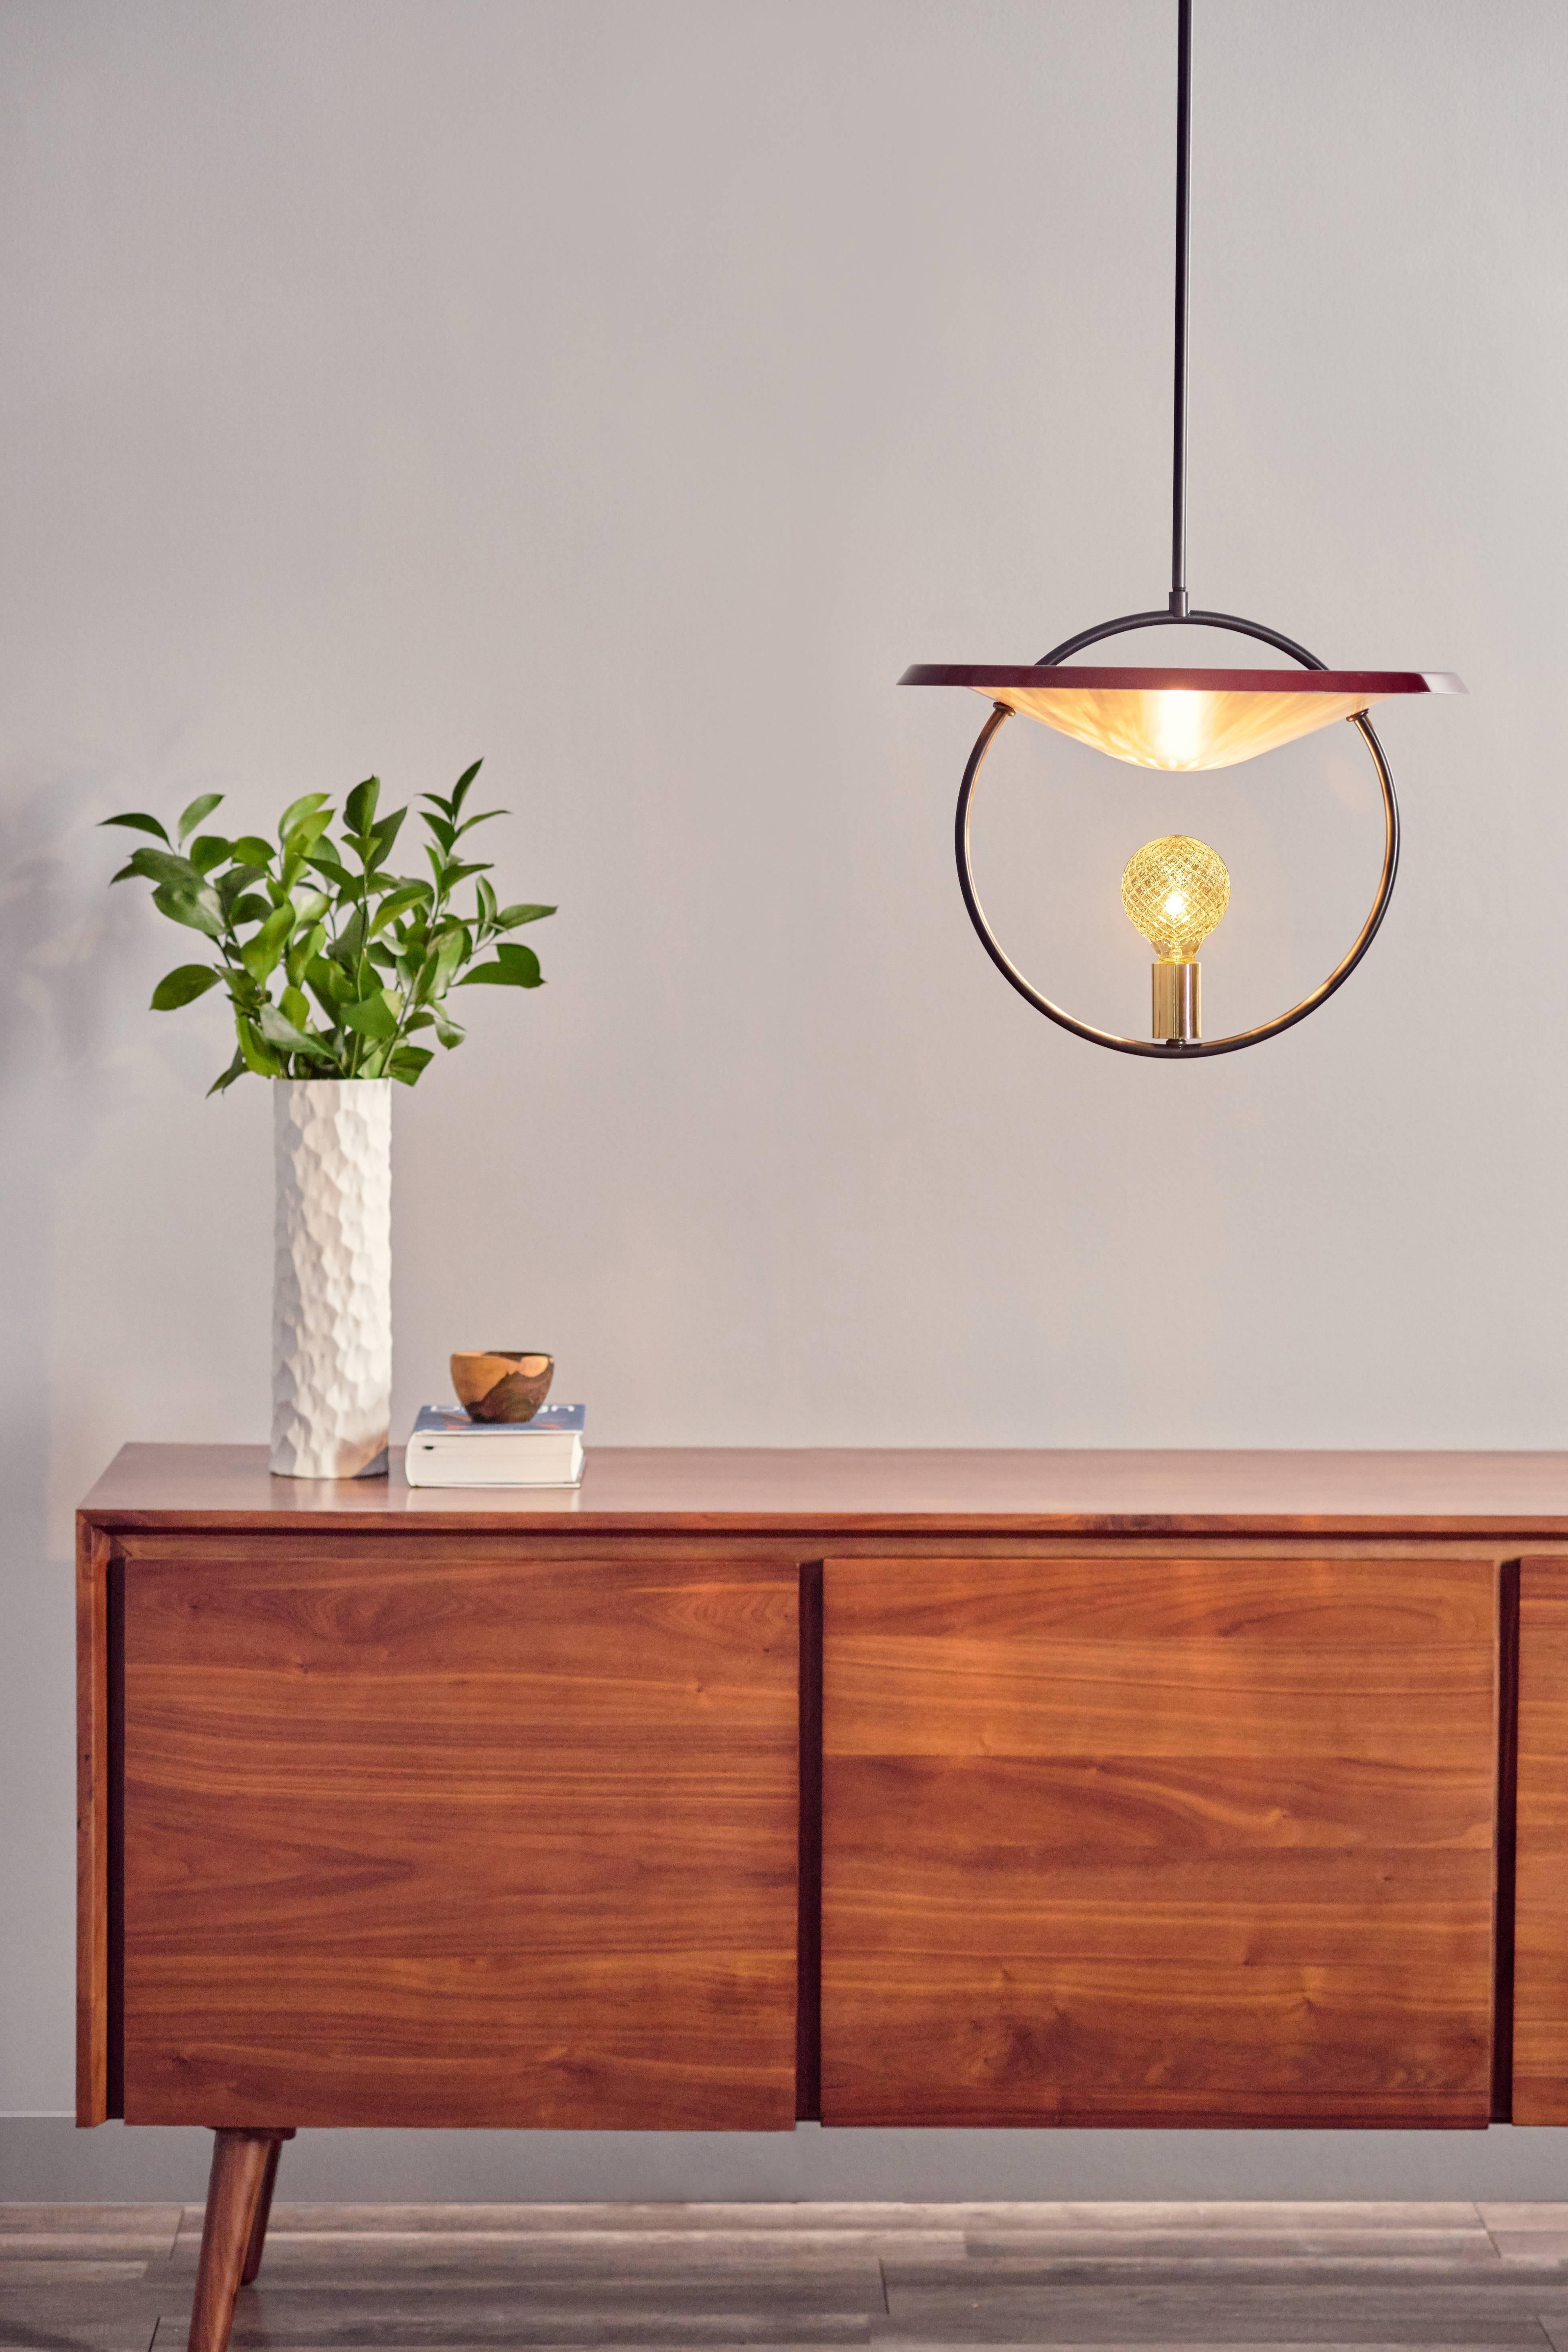 Create a weightless light sculpture with this Mid-Century Modern inspired pendant. A textured LED bulb casts stunning shadows and balances effortlessly inside of a sleek solid brass ring, elevating elegance and refinement. It embodies a whimsical